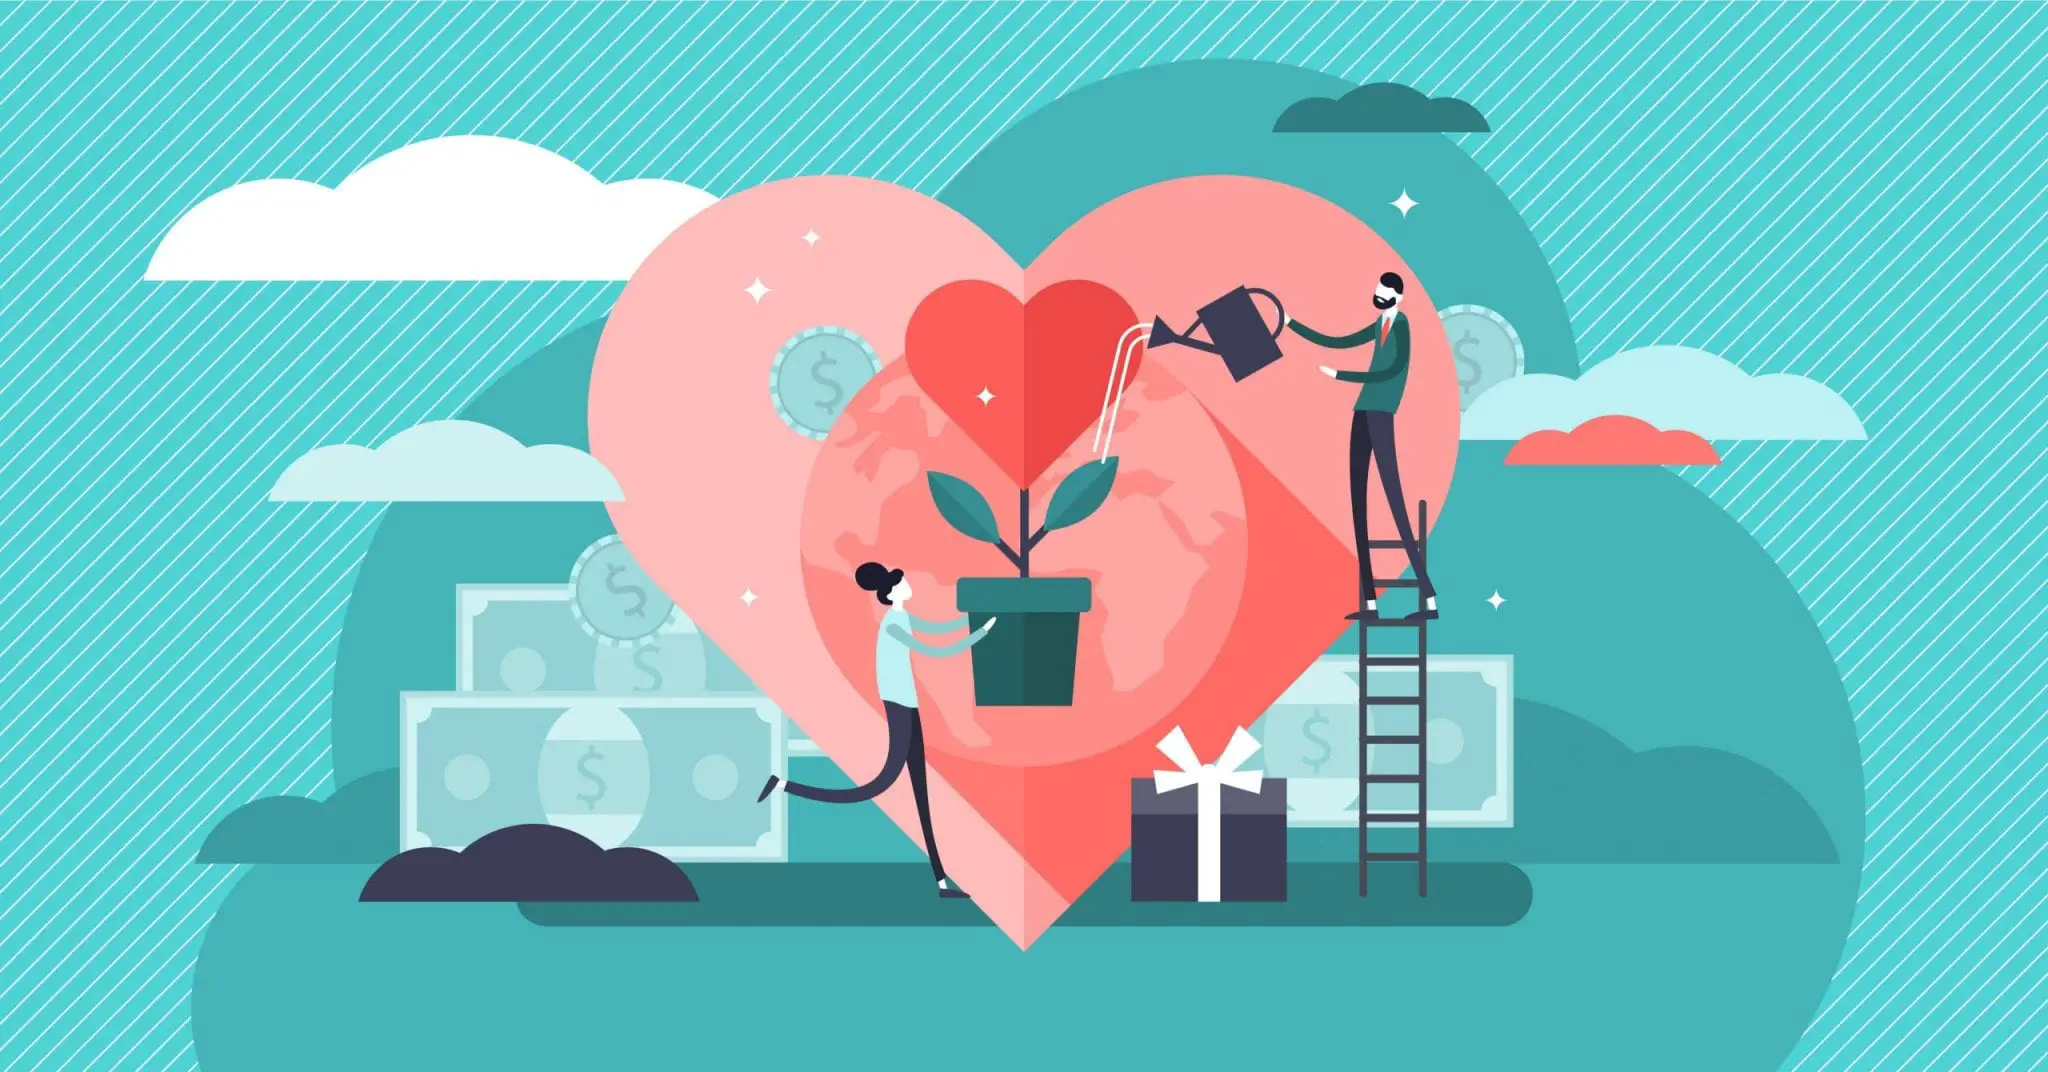 Philanthropy Vector Illustration. Flat Tiny Voluntary Charity Persons Concept. Symbolic Love of Humanity as Nonprofit Social Teamwork. Support Contribution, Gifts and Abstract Public Good Improvement.